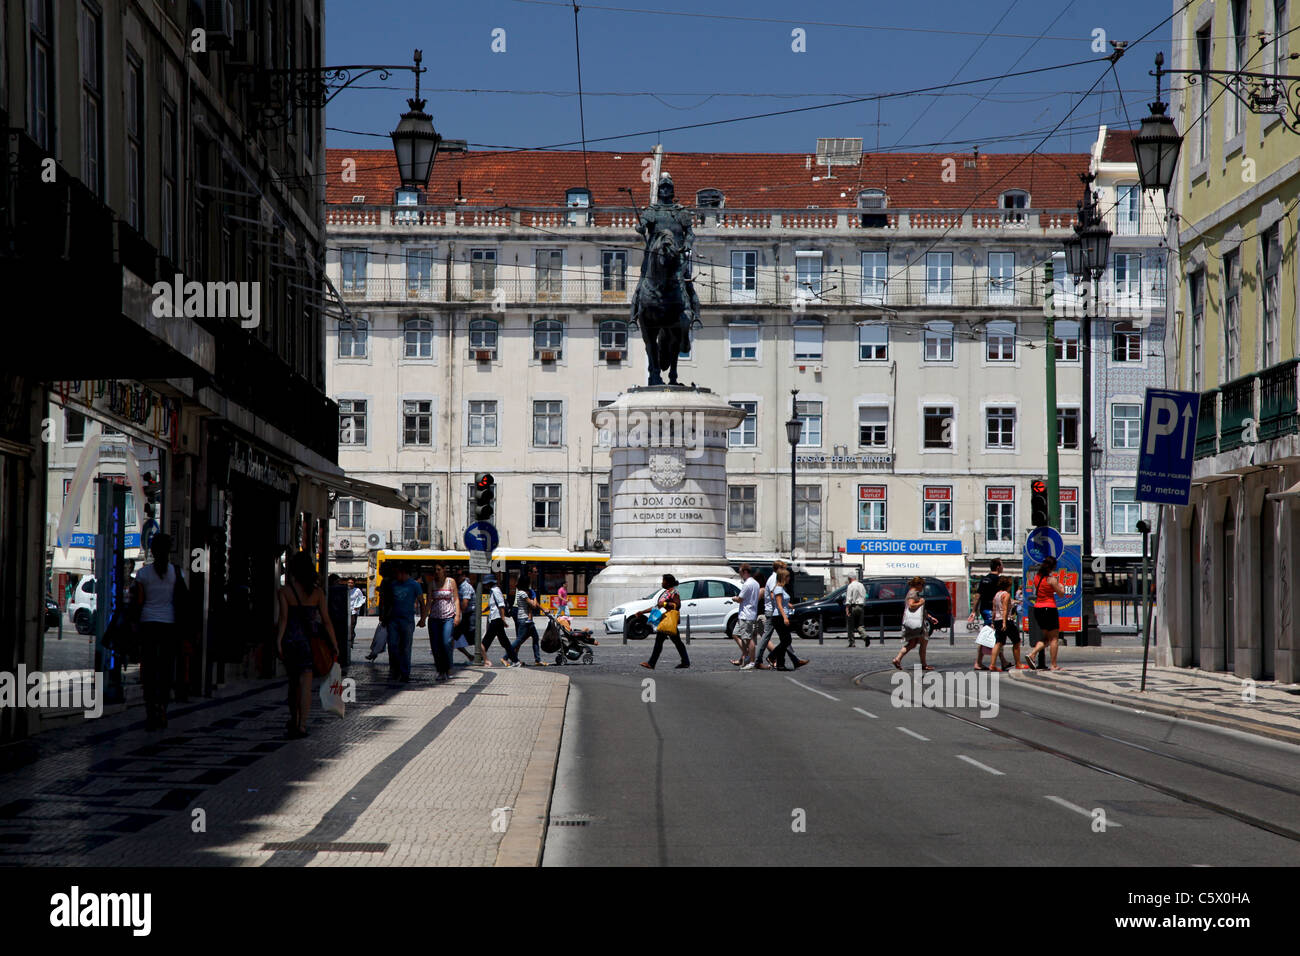 A glimpse of Rossio square, the Dom Pedro IV Statue and some crowd and busses Stock Photo